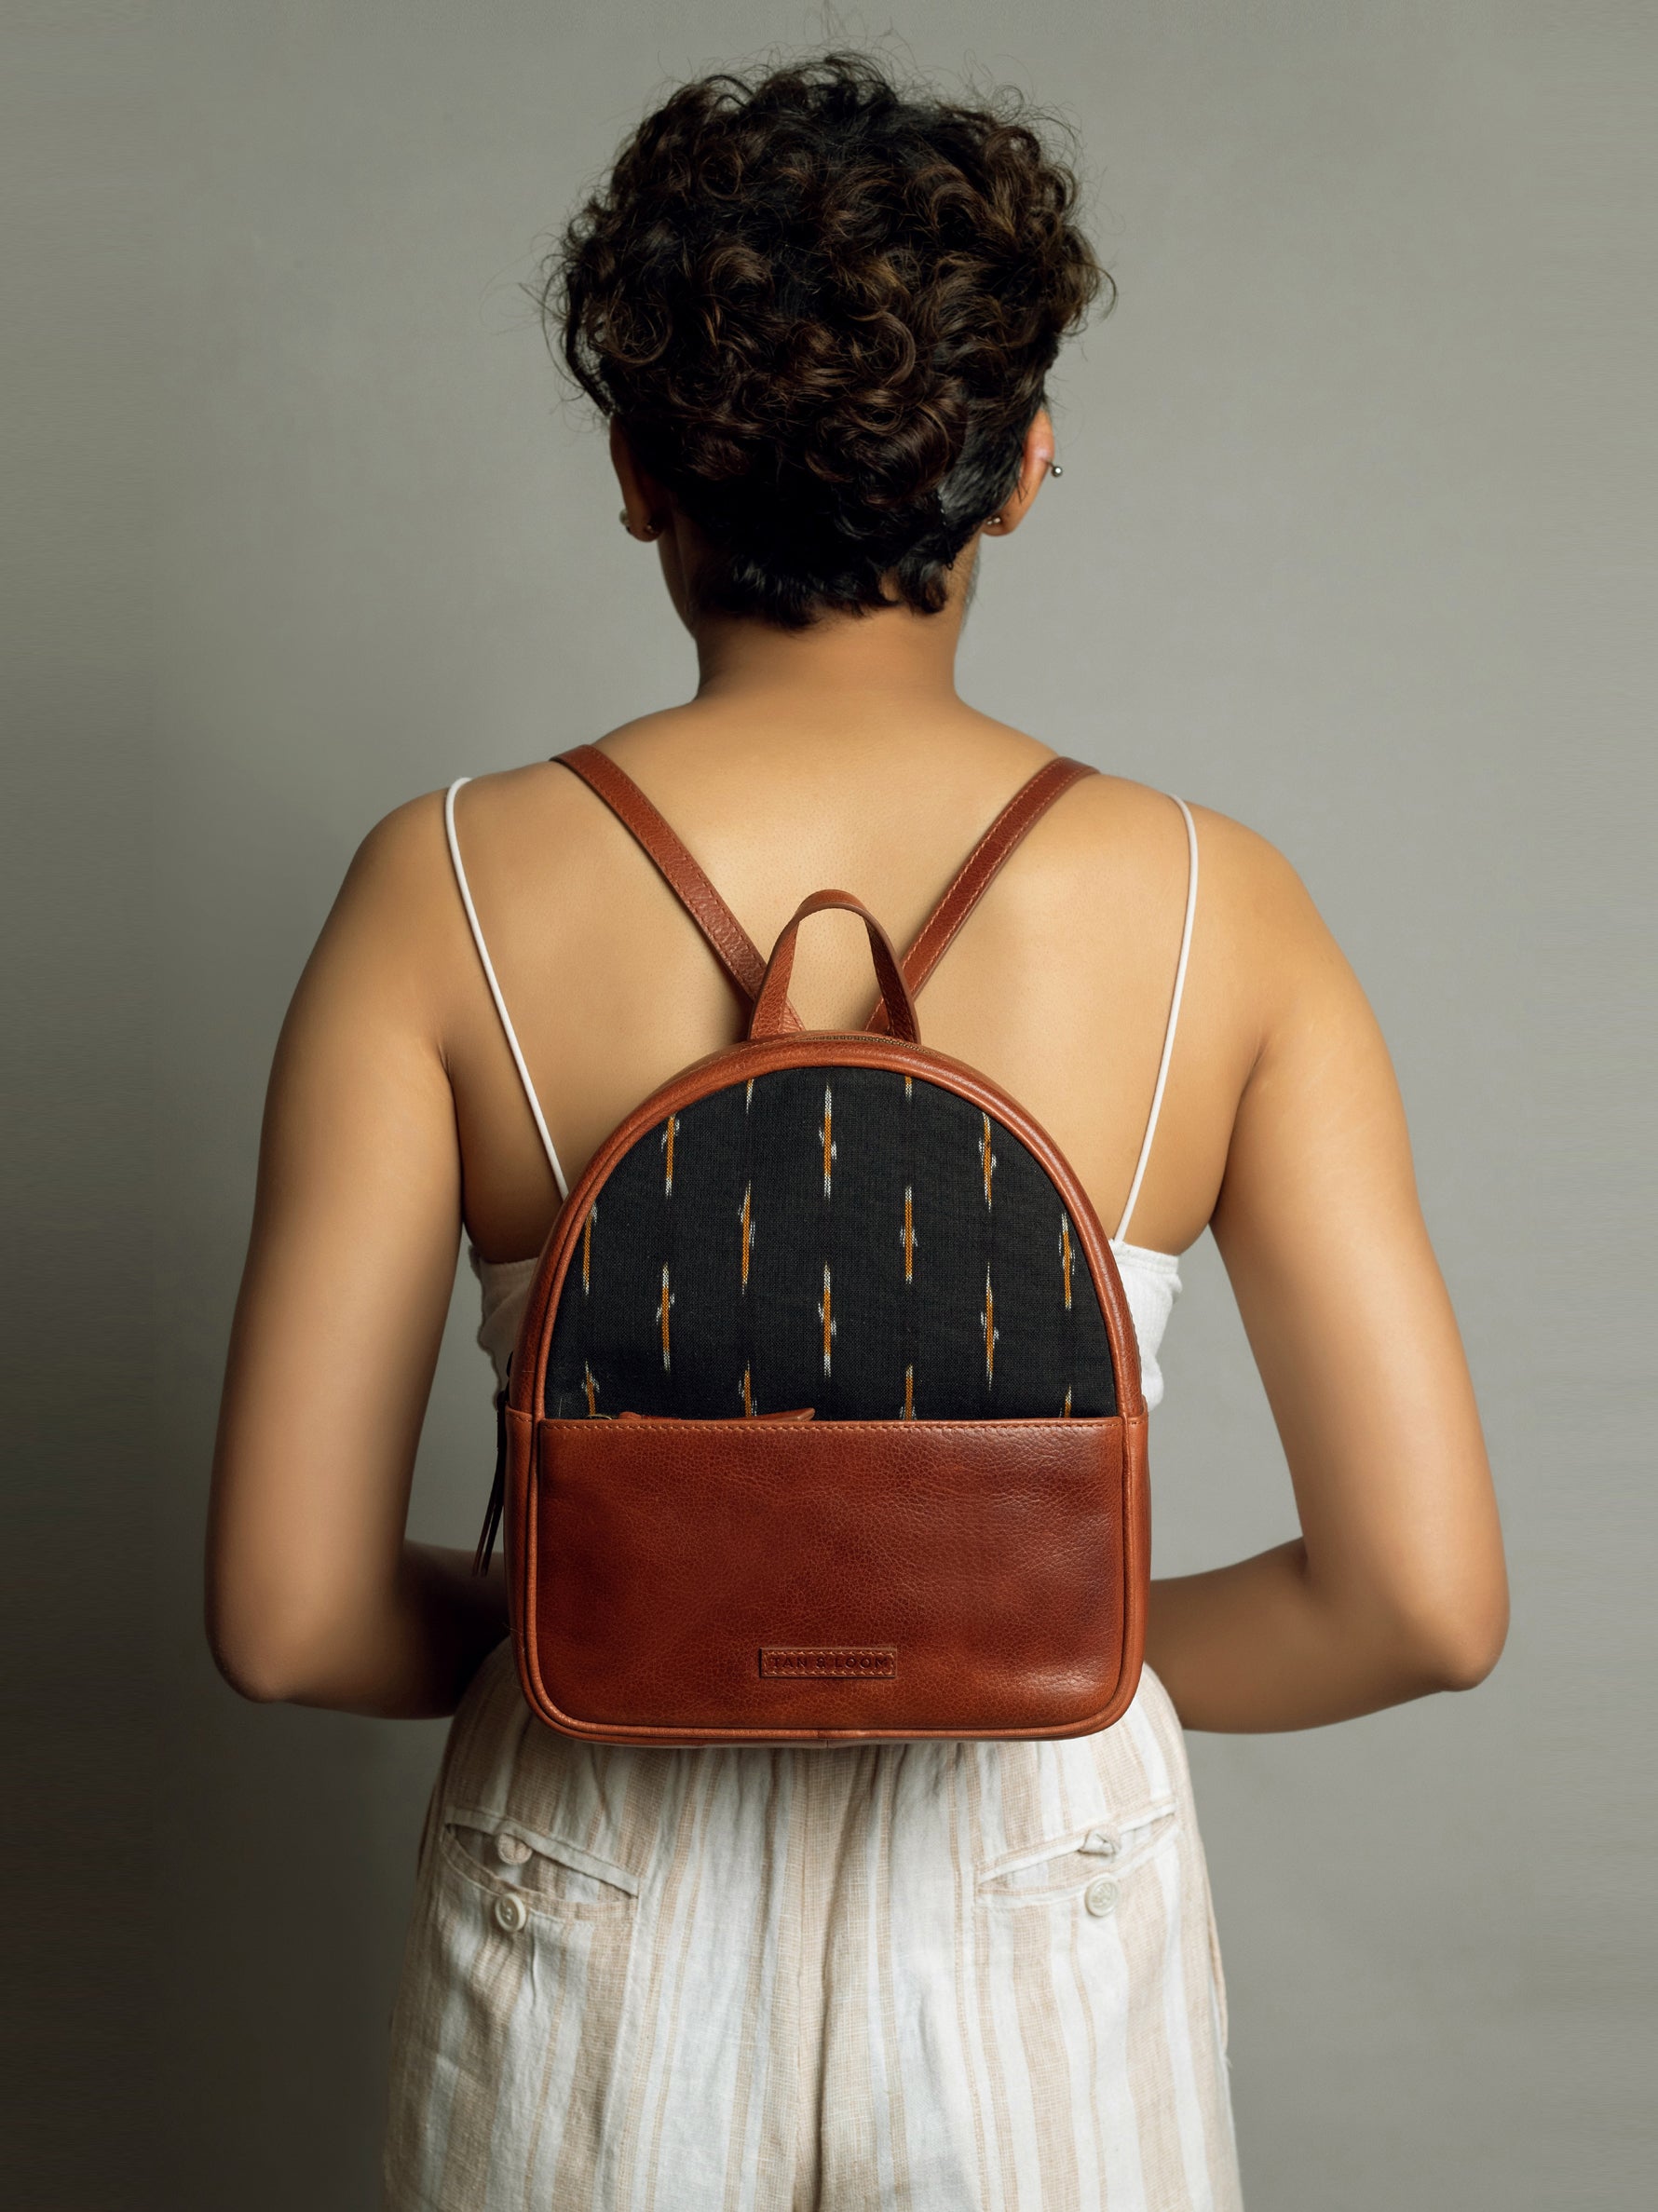 Handcrafted Premium Genuine Vegetable Tanned Leather & Ikat Black & Yellow Backpack for Women Tan & Loom